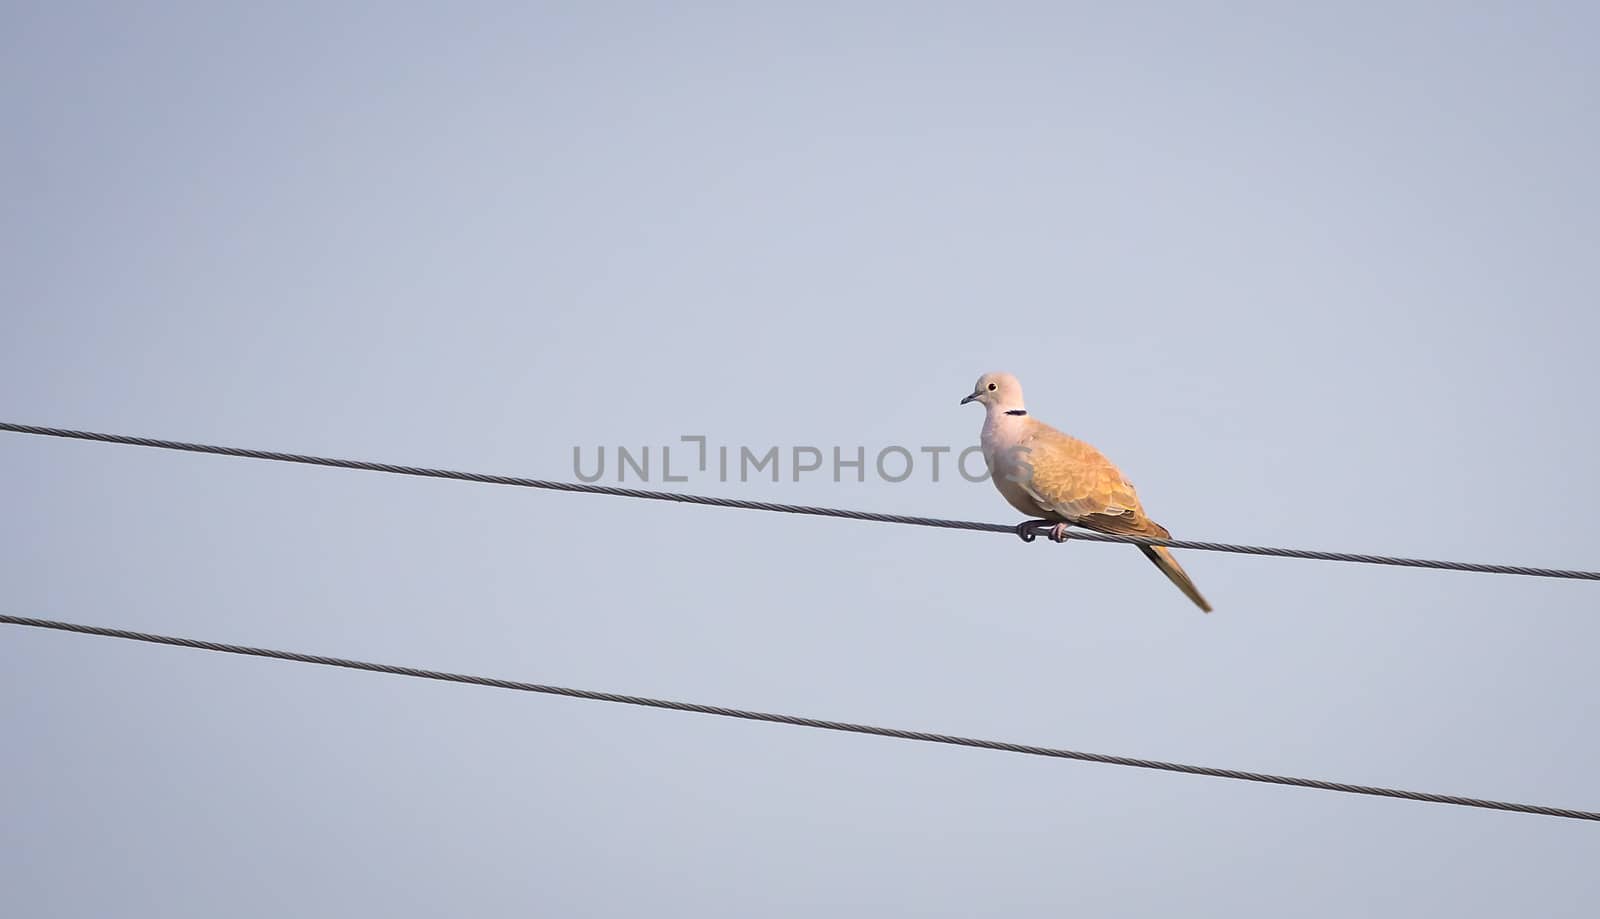 Eurasian collared dove sitting on parallel electric wire by rkbalaji